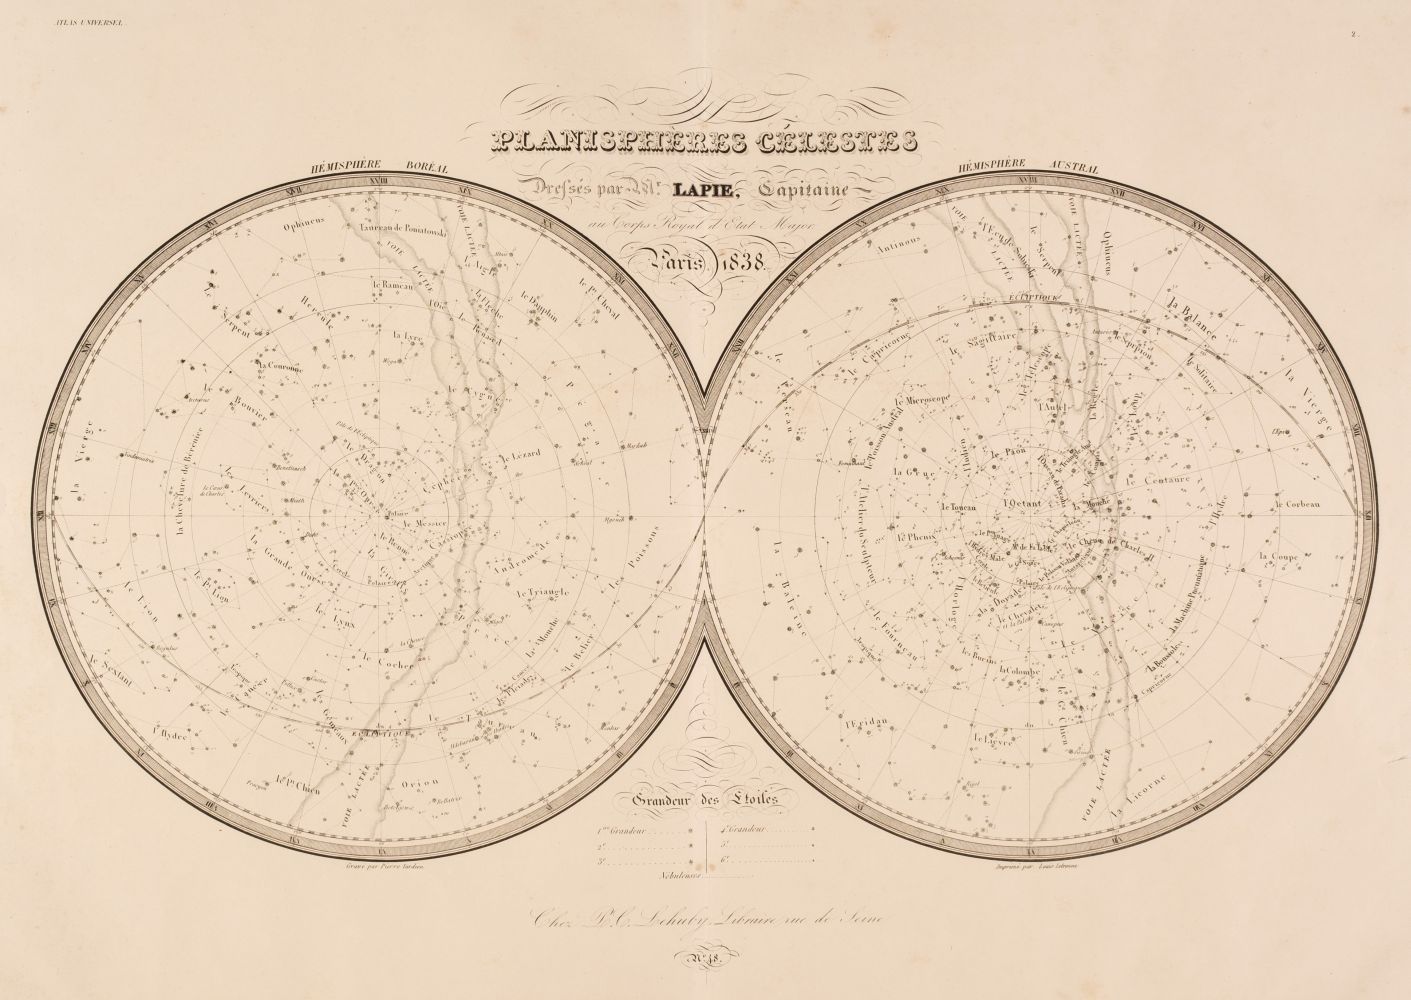 Maps. A collection of approximately 40 British & foreign maps, 18th & 19th century